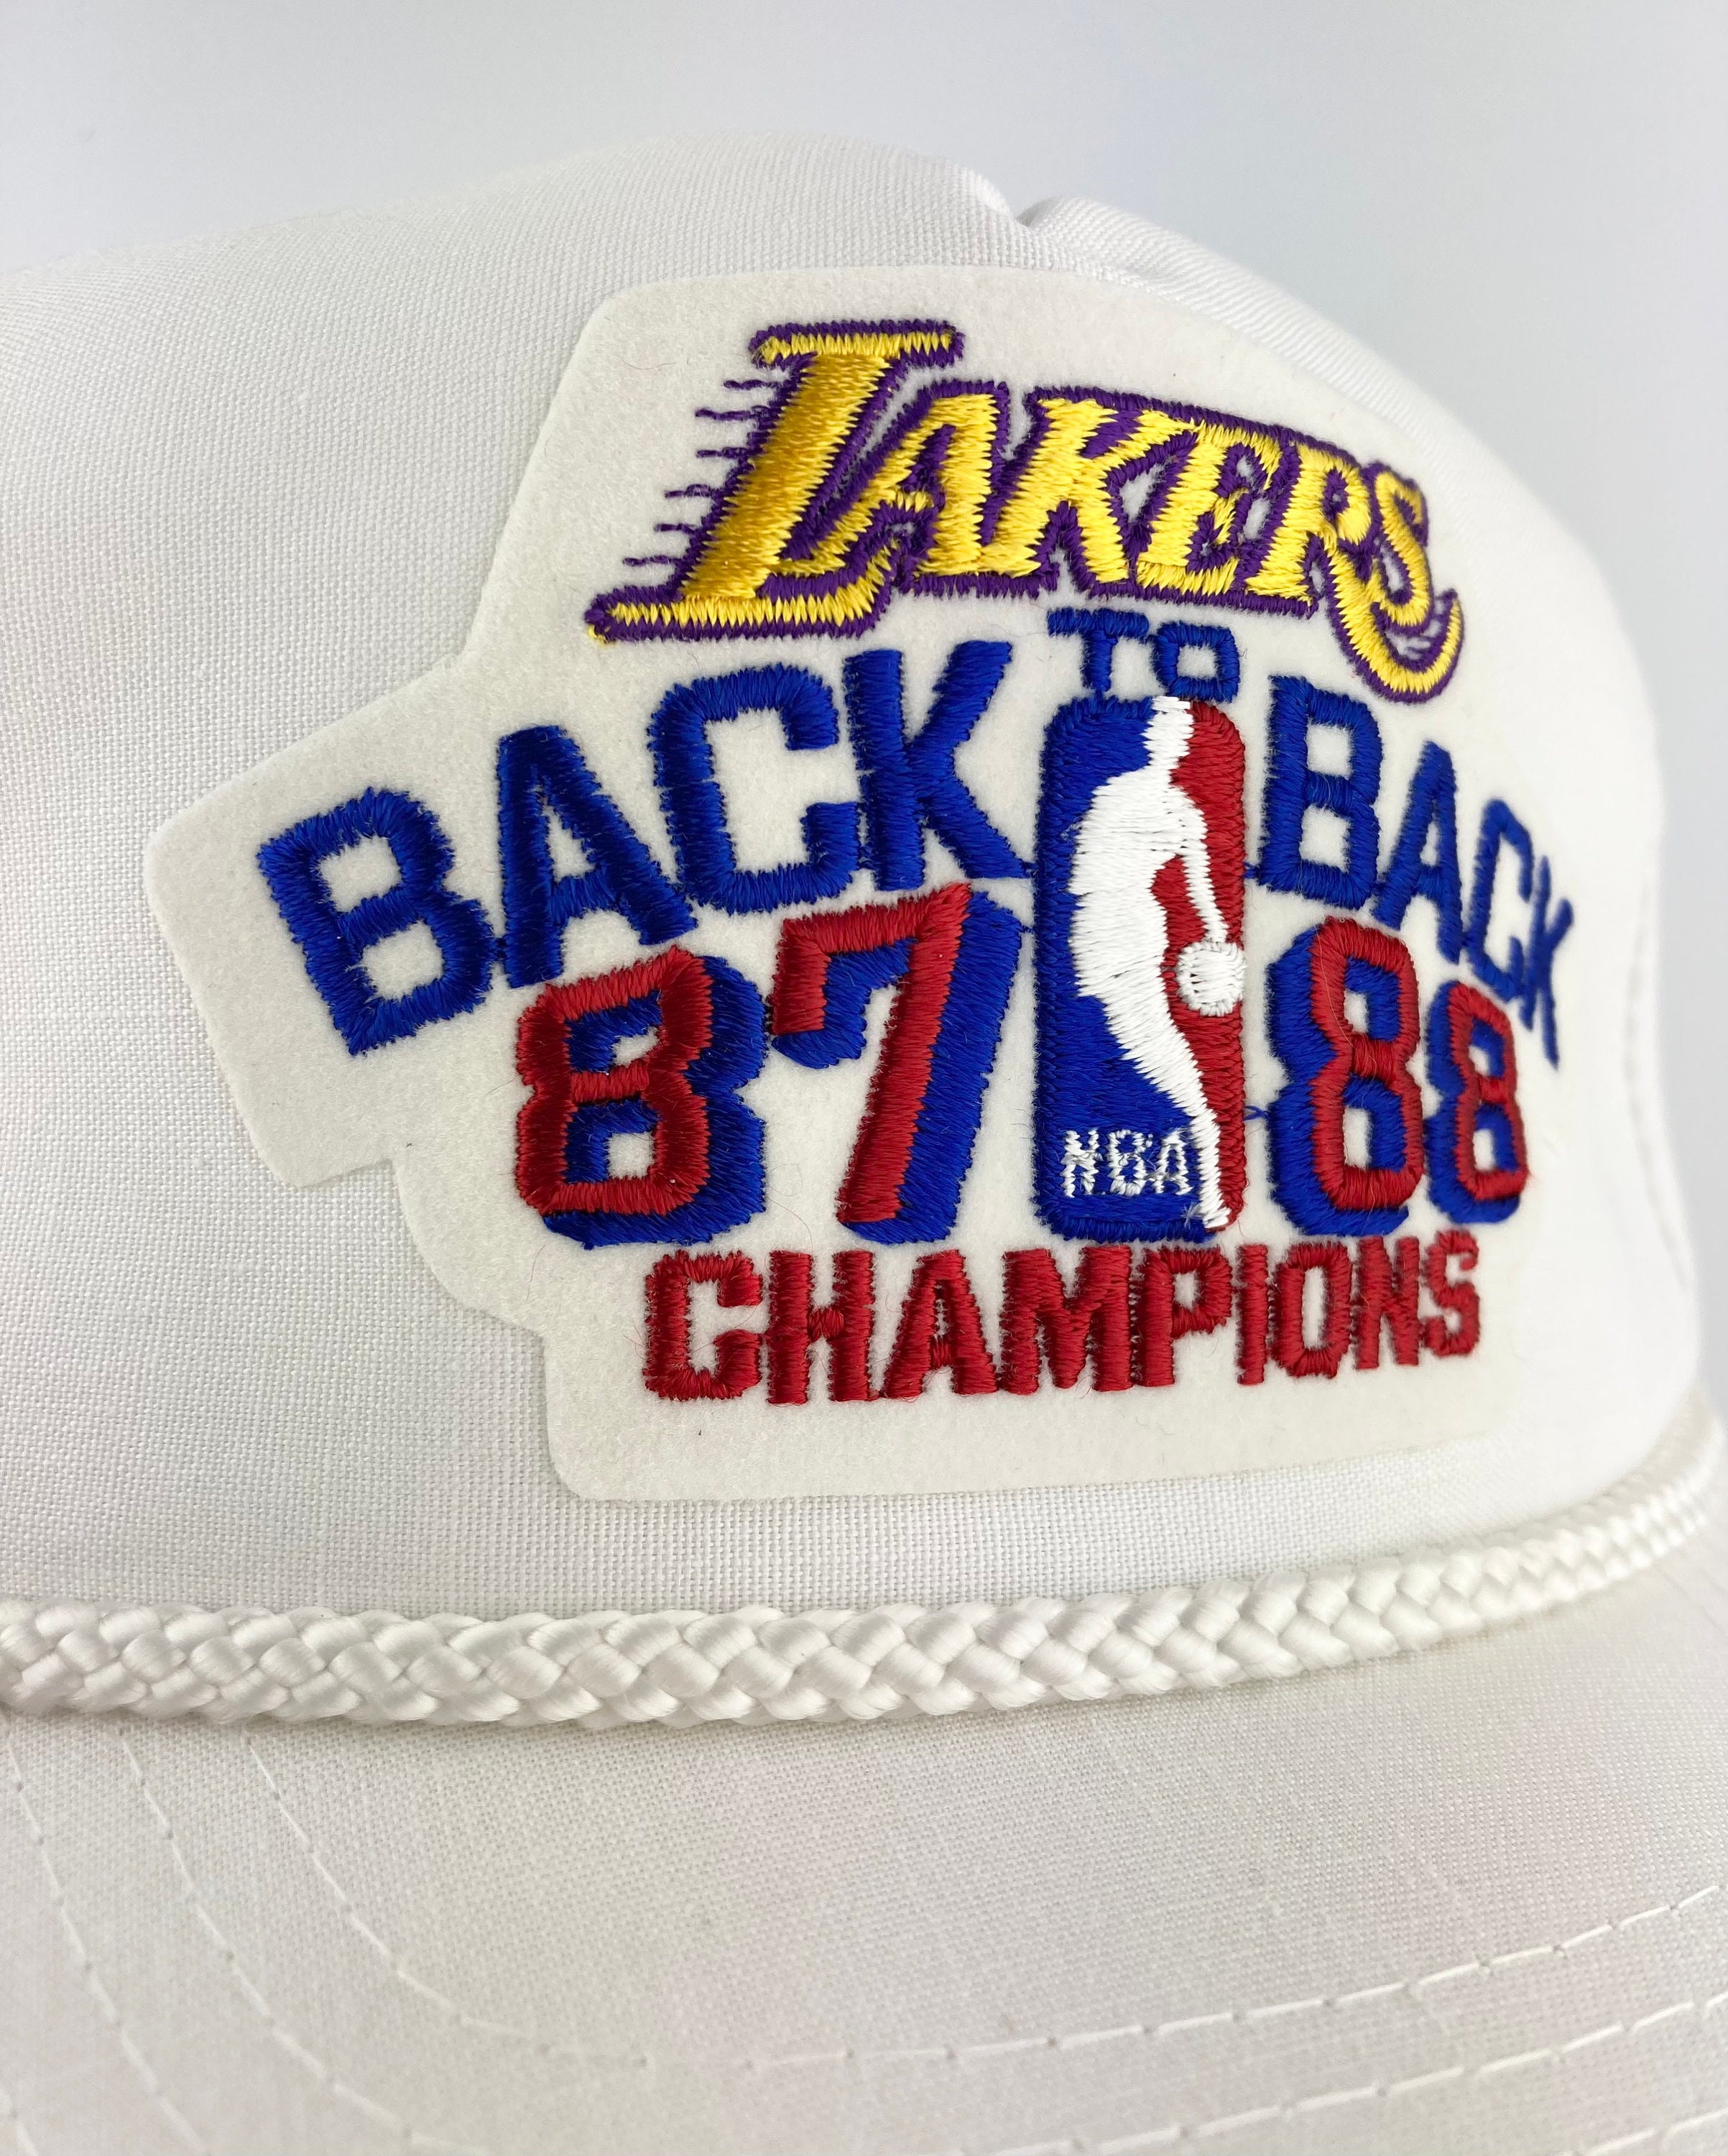 Vintage 1987-88 Los Angeles Lakers Back-to-Back Champions Snapback Hat